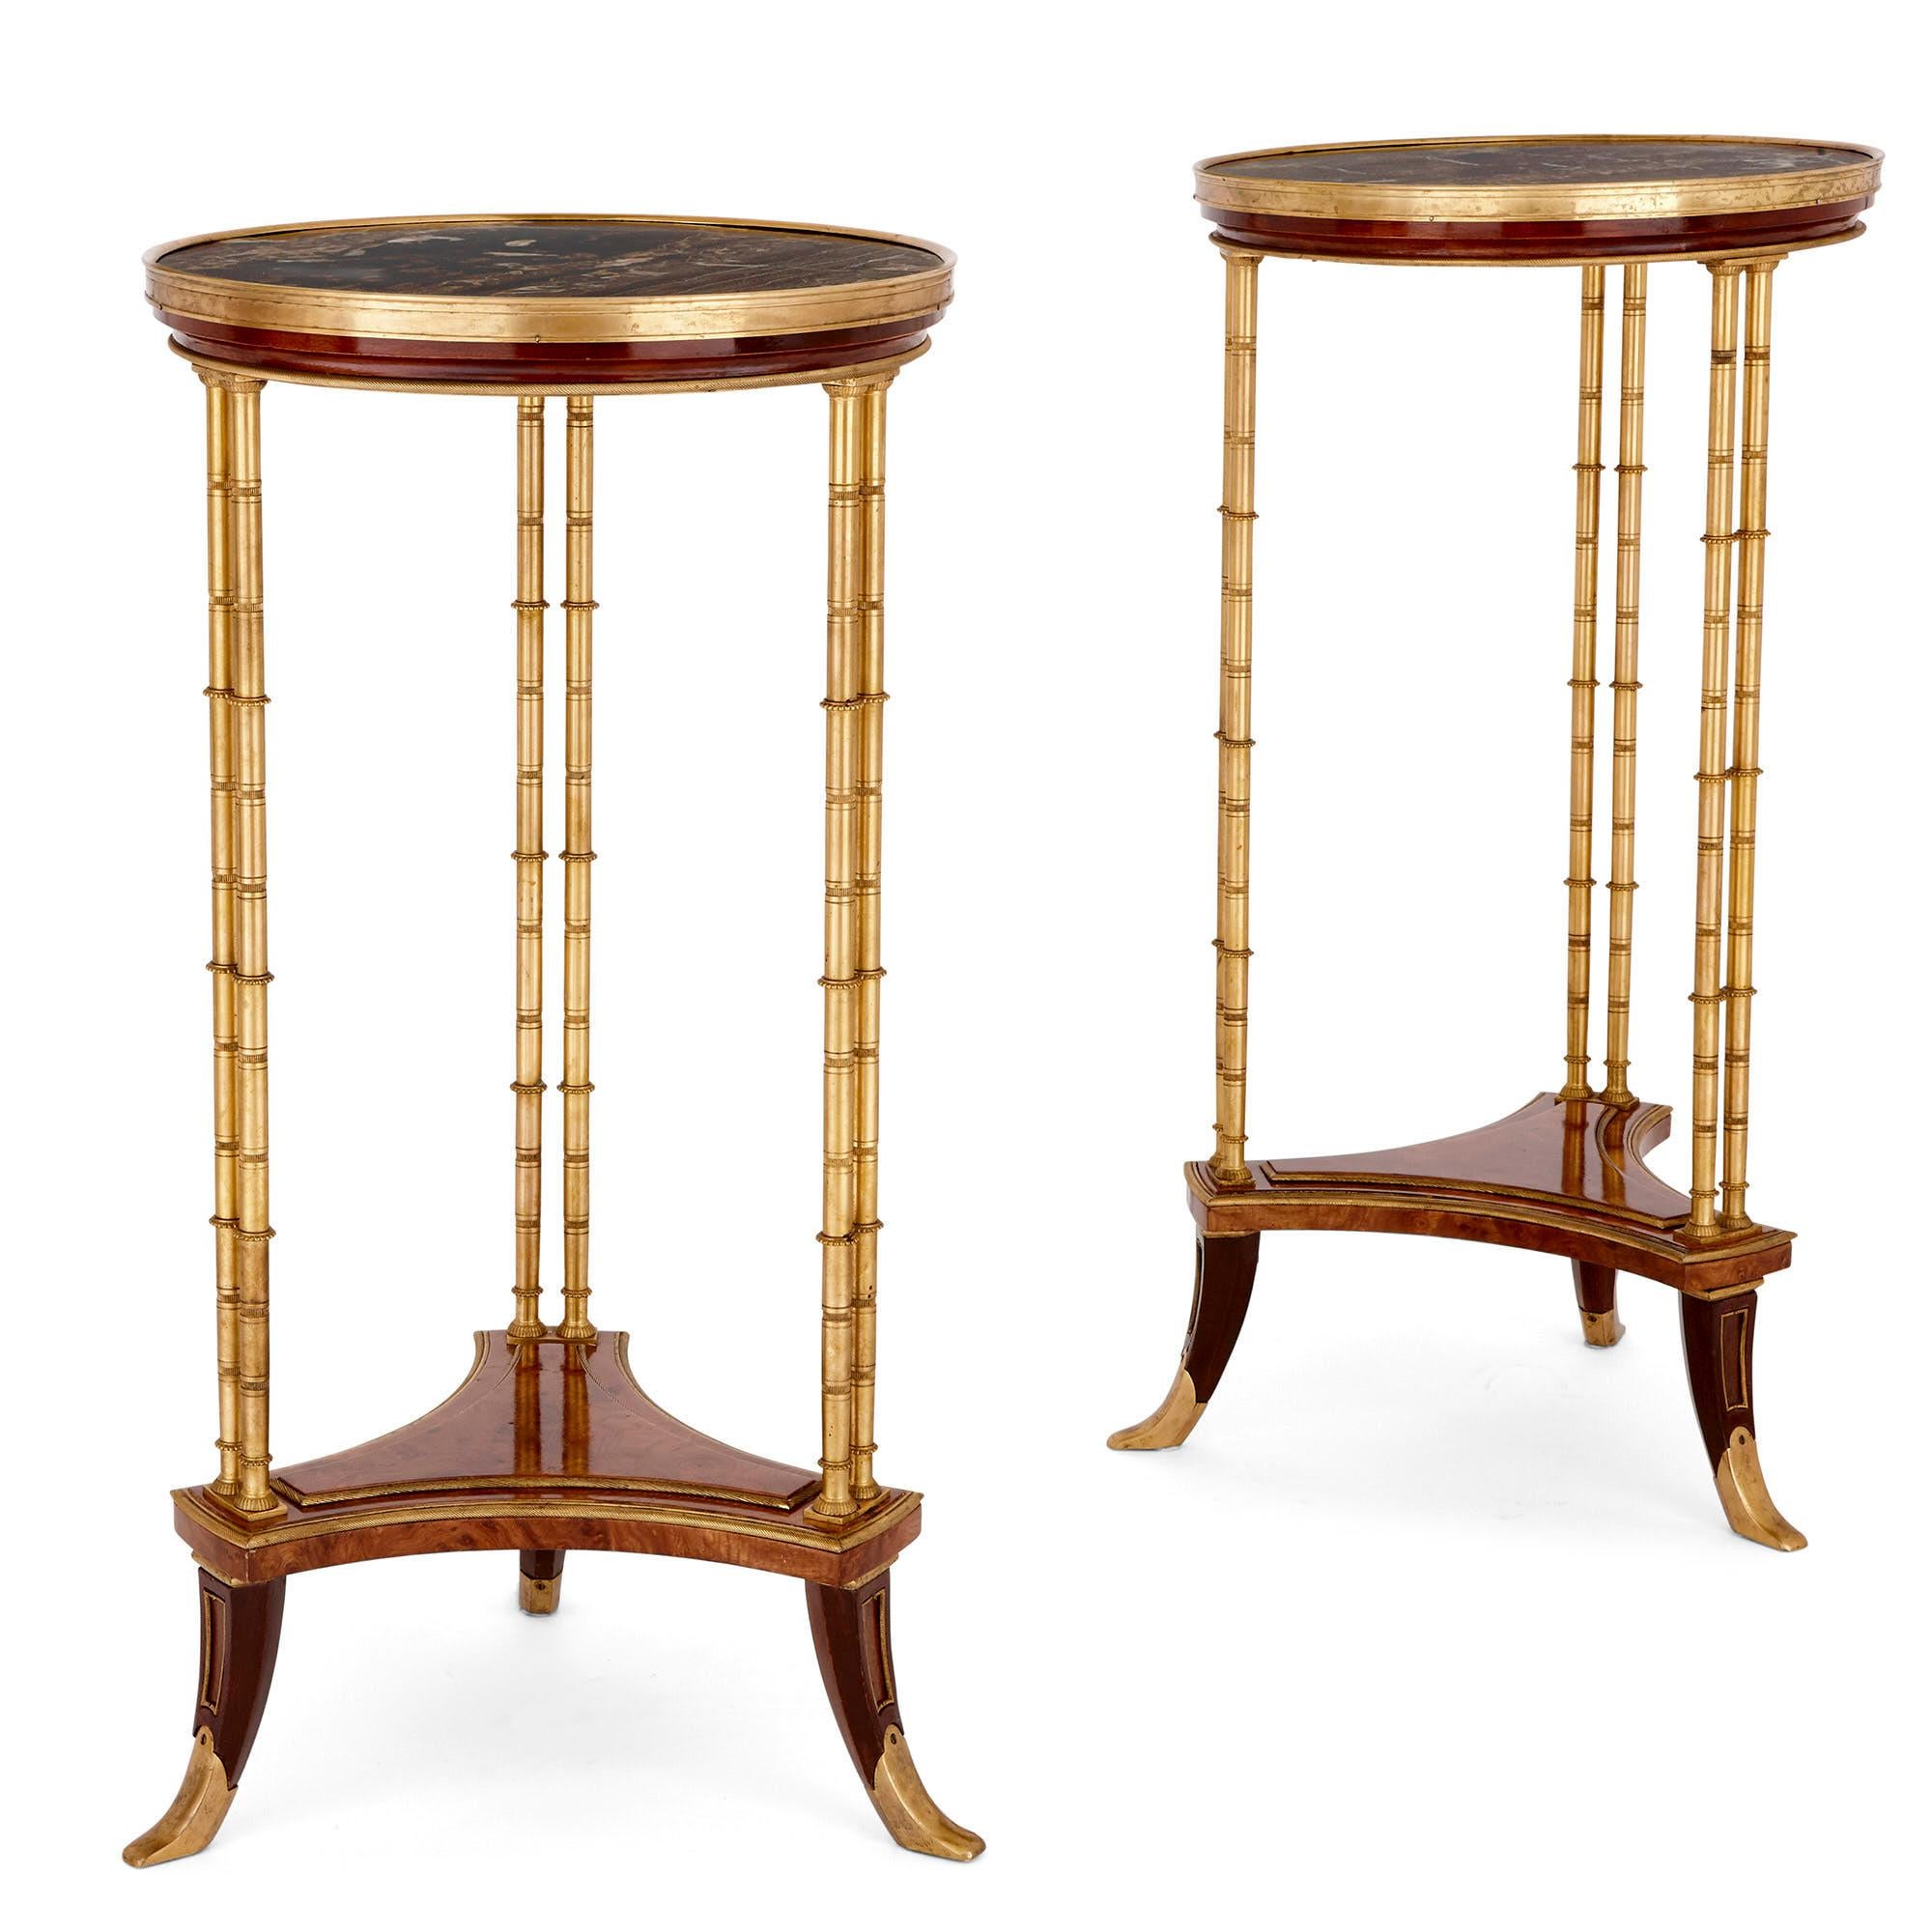 These beautiful circular side tables (French: guéridons) have been crafted from the finest materials, including marble, gilt bronze (ormolu) and mahogany wood. The tables are designed in a refined neoclassical style which is associated with the